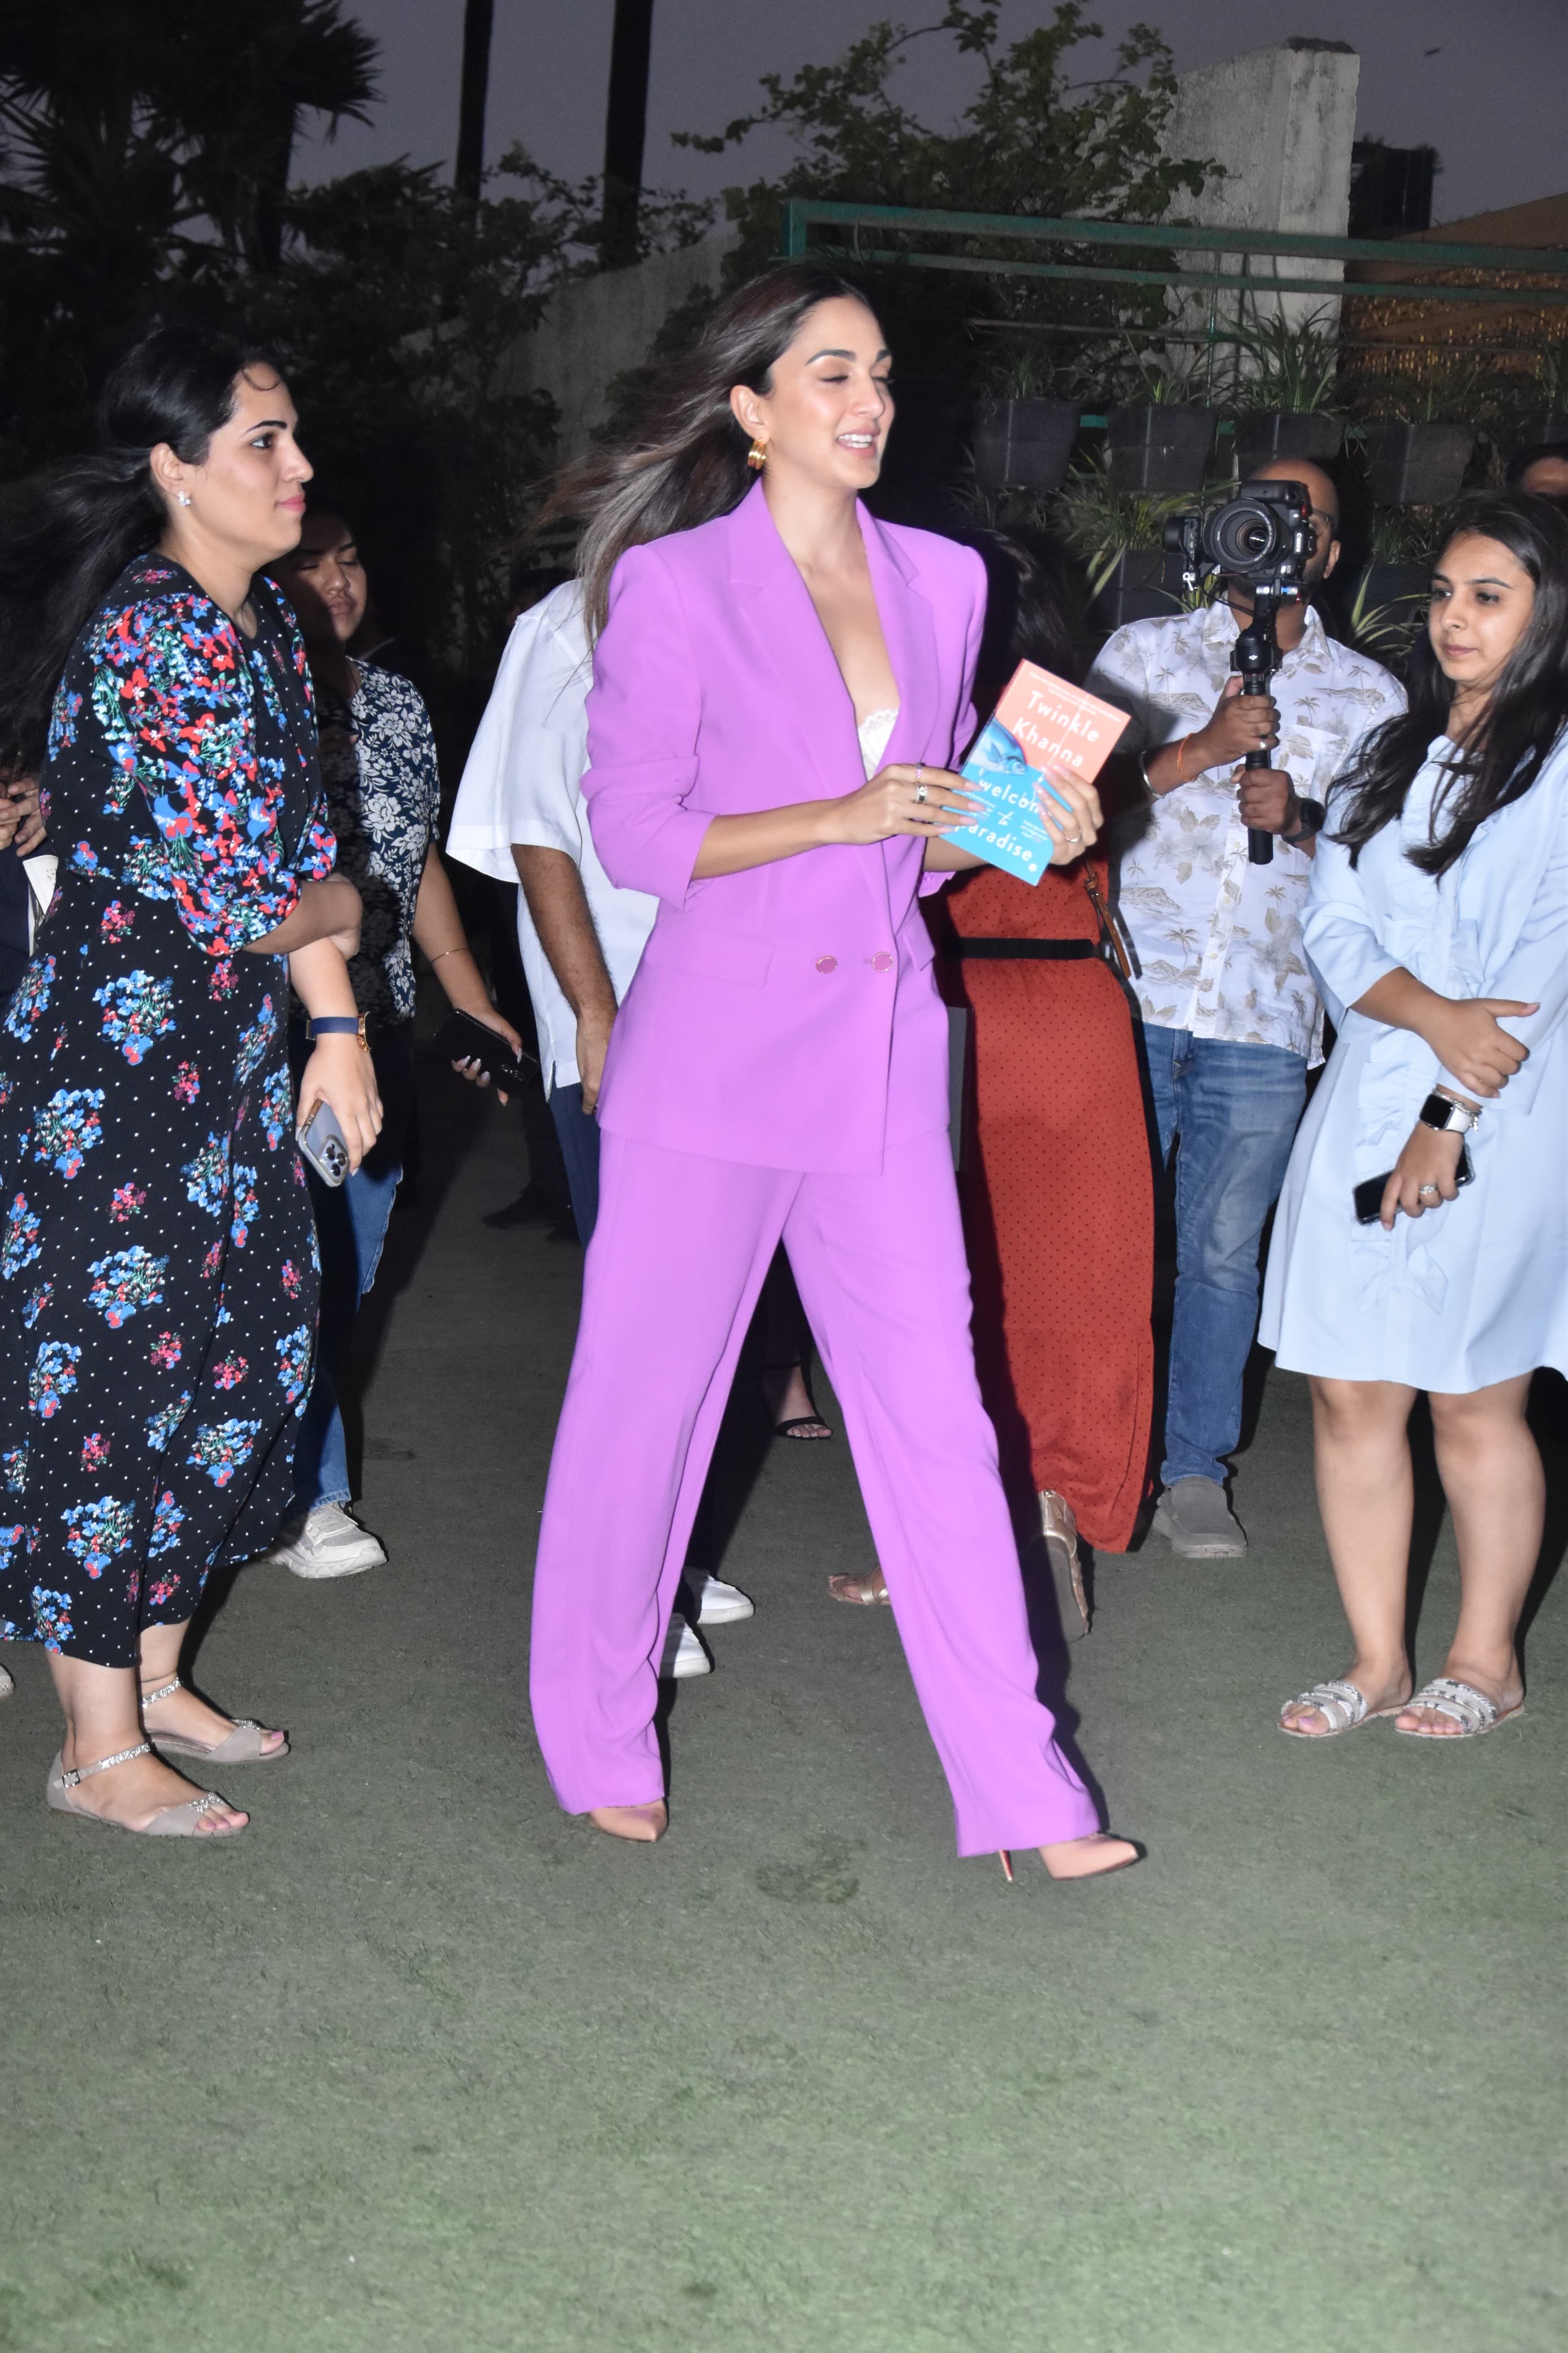 Kiara Advani was clicked in the city as she went out to attend an event wearing an all-pink formal outfit